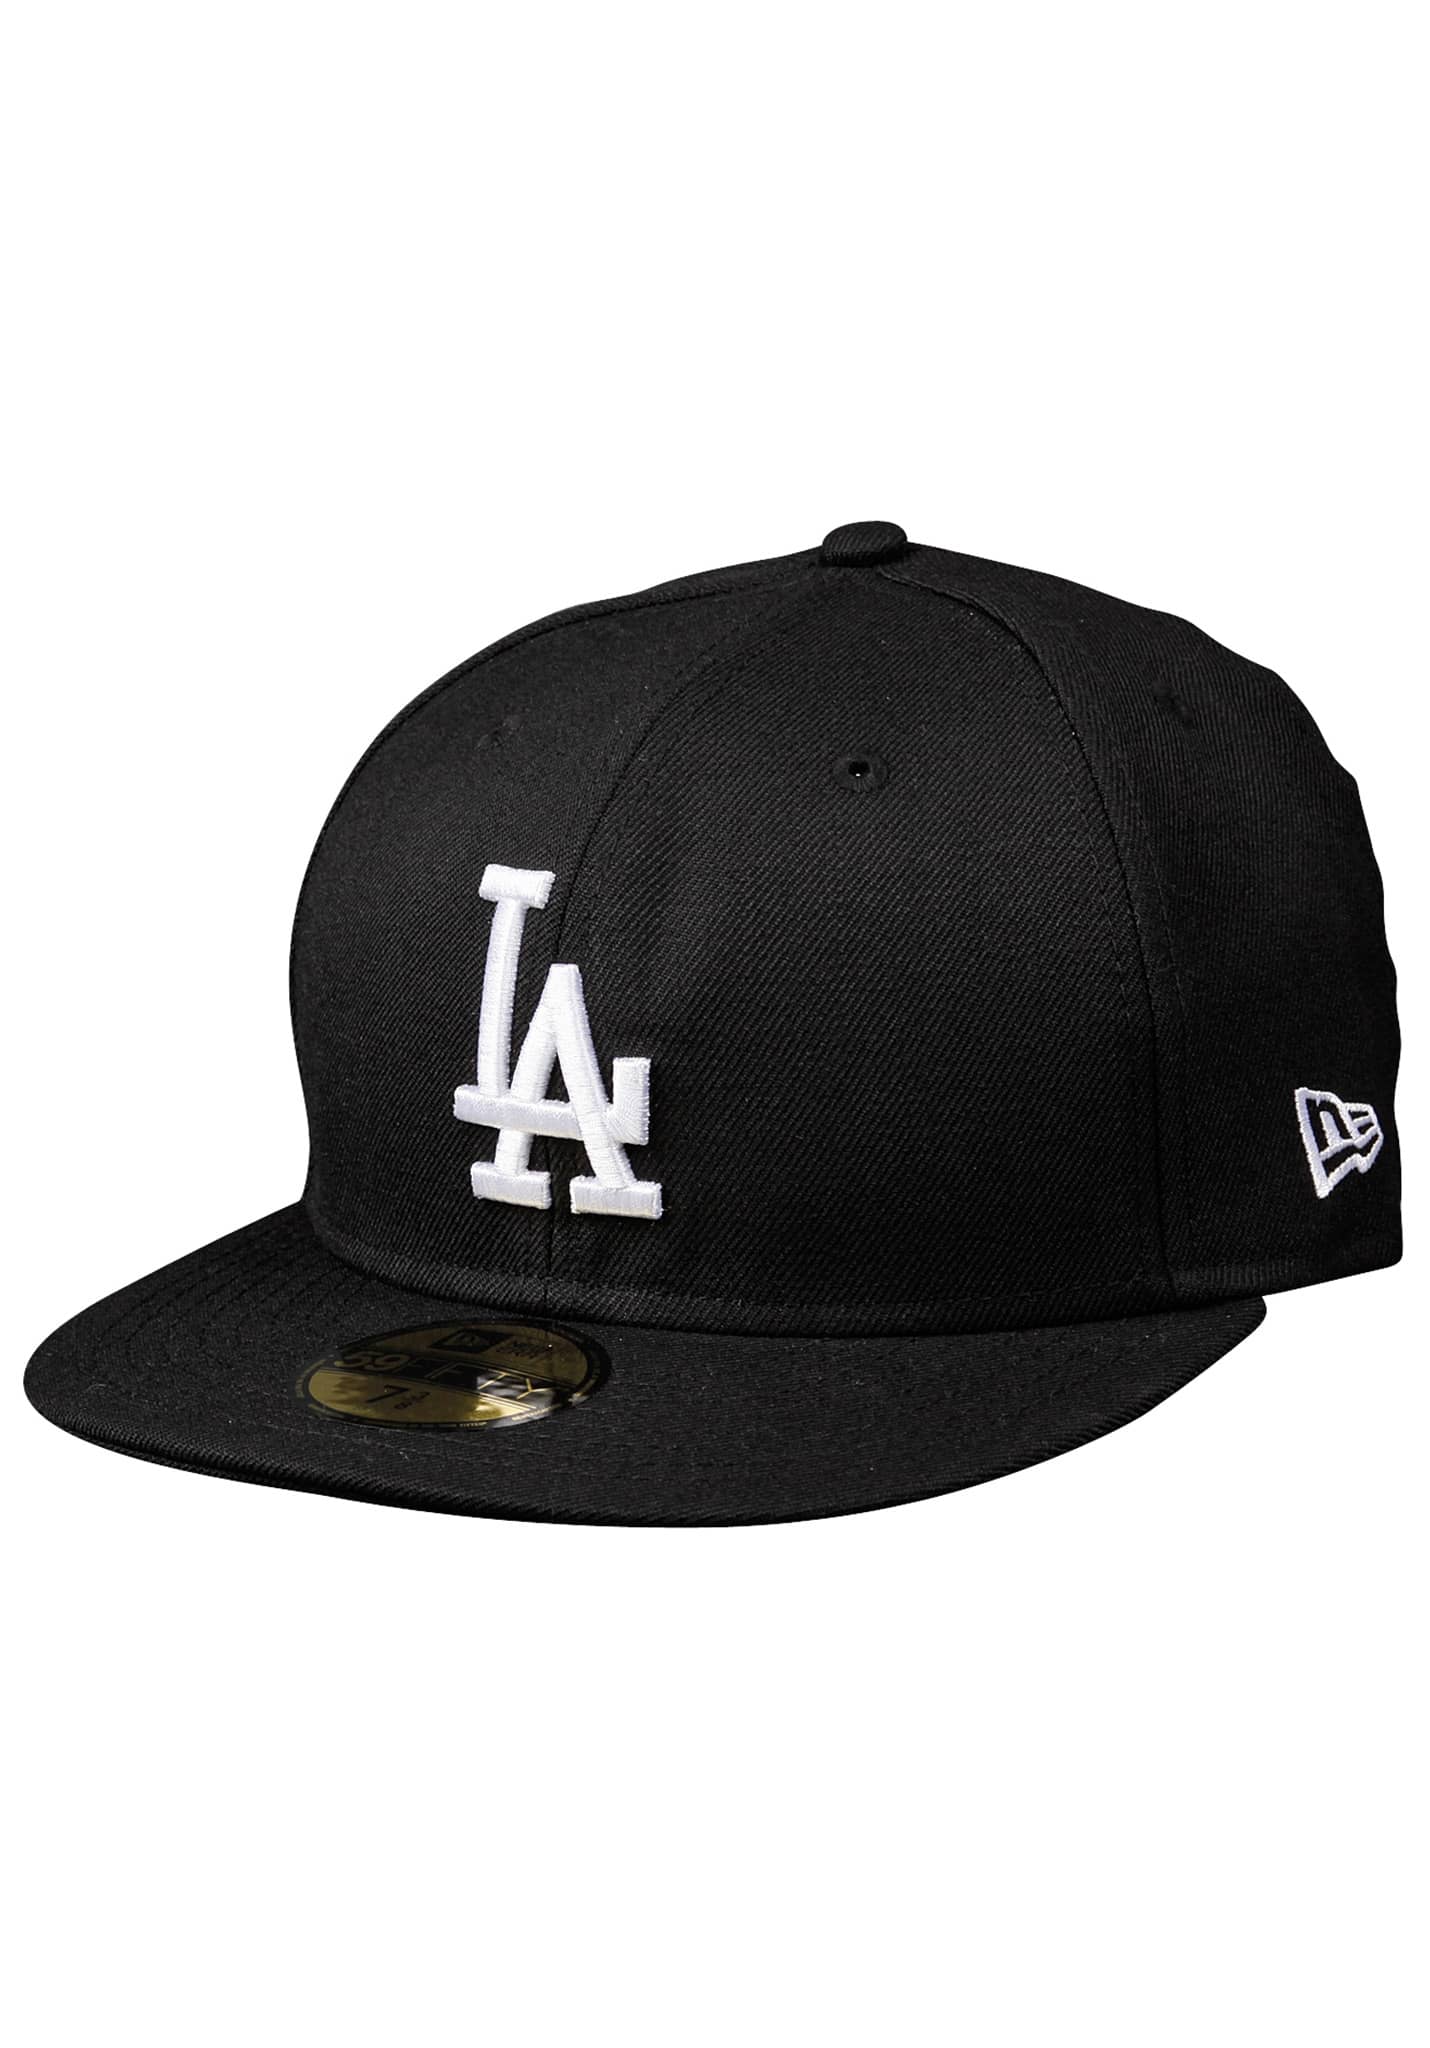 New Era 59Fifty Los Angeles Dodgers Fitted Cap black-white 7 7/8